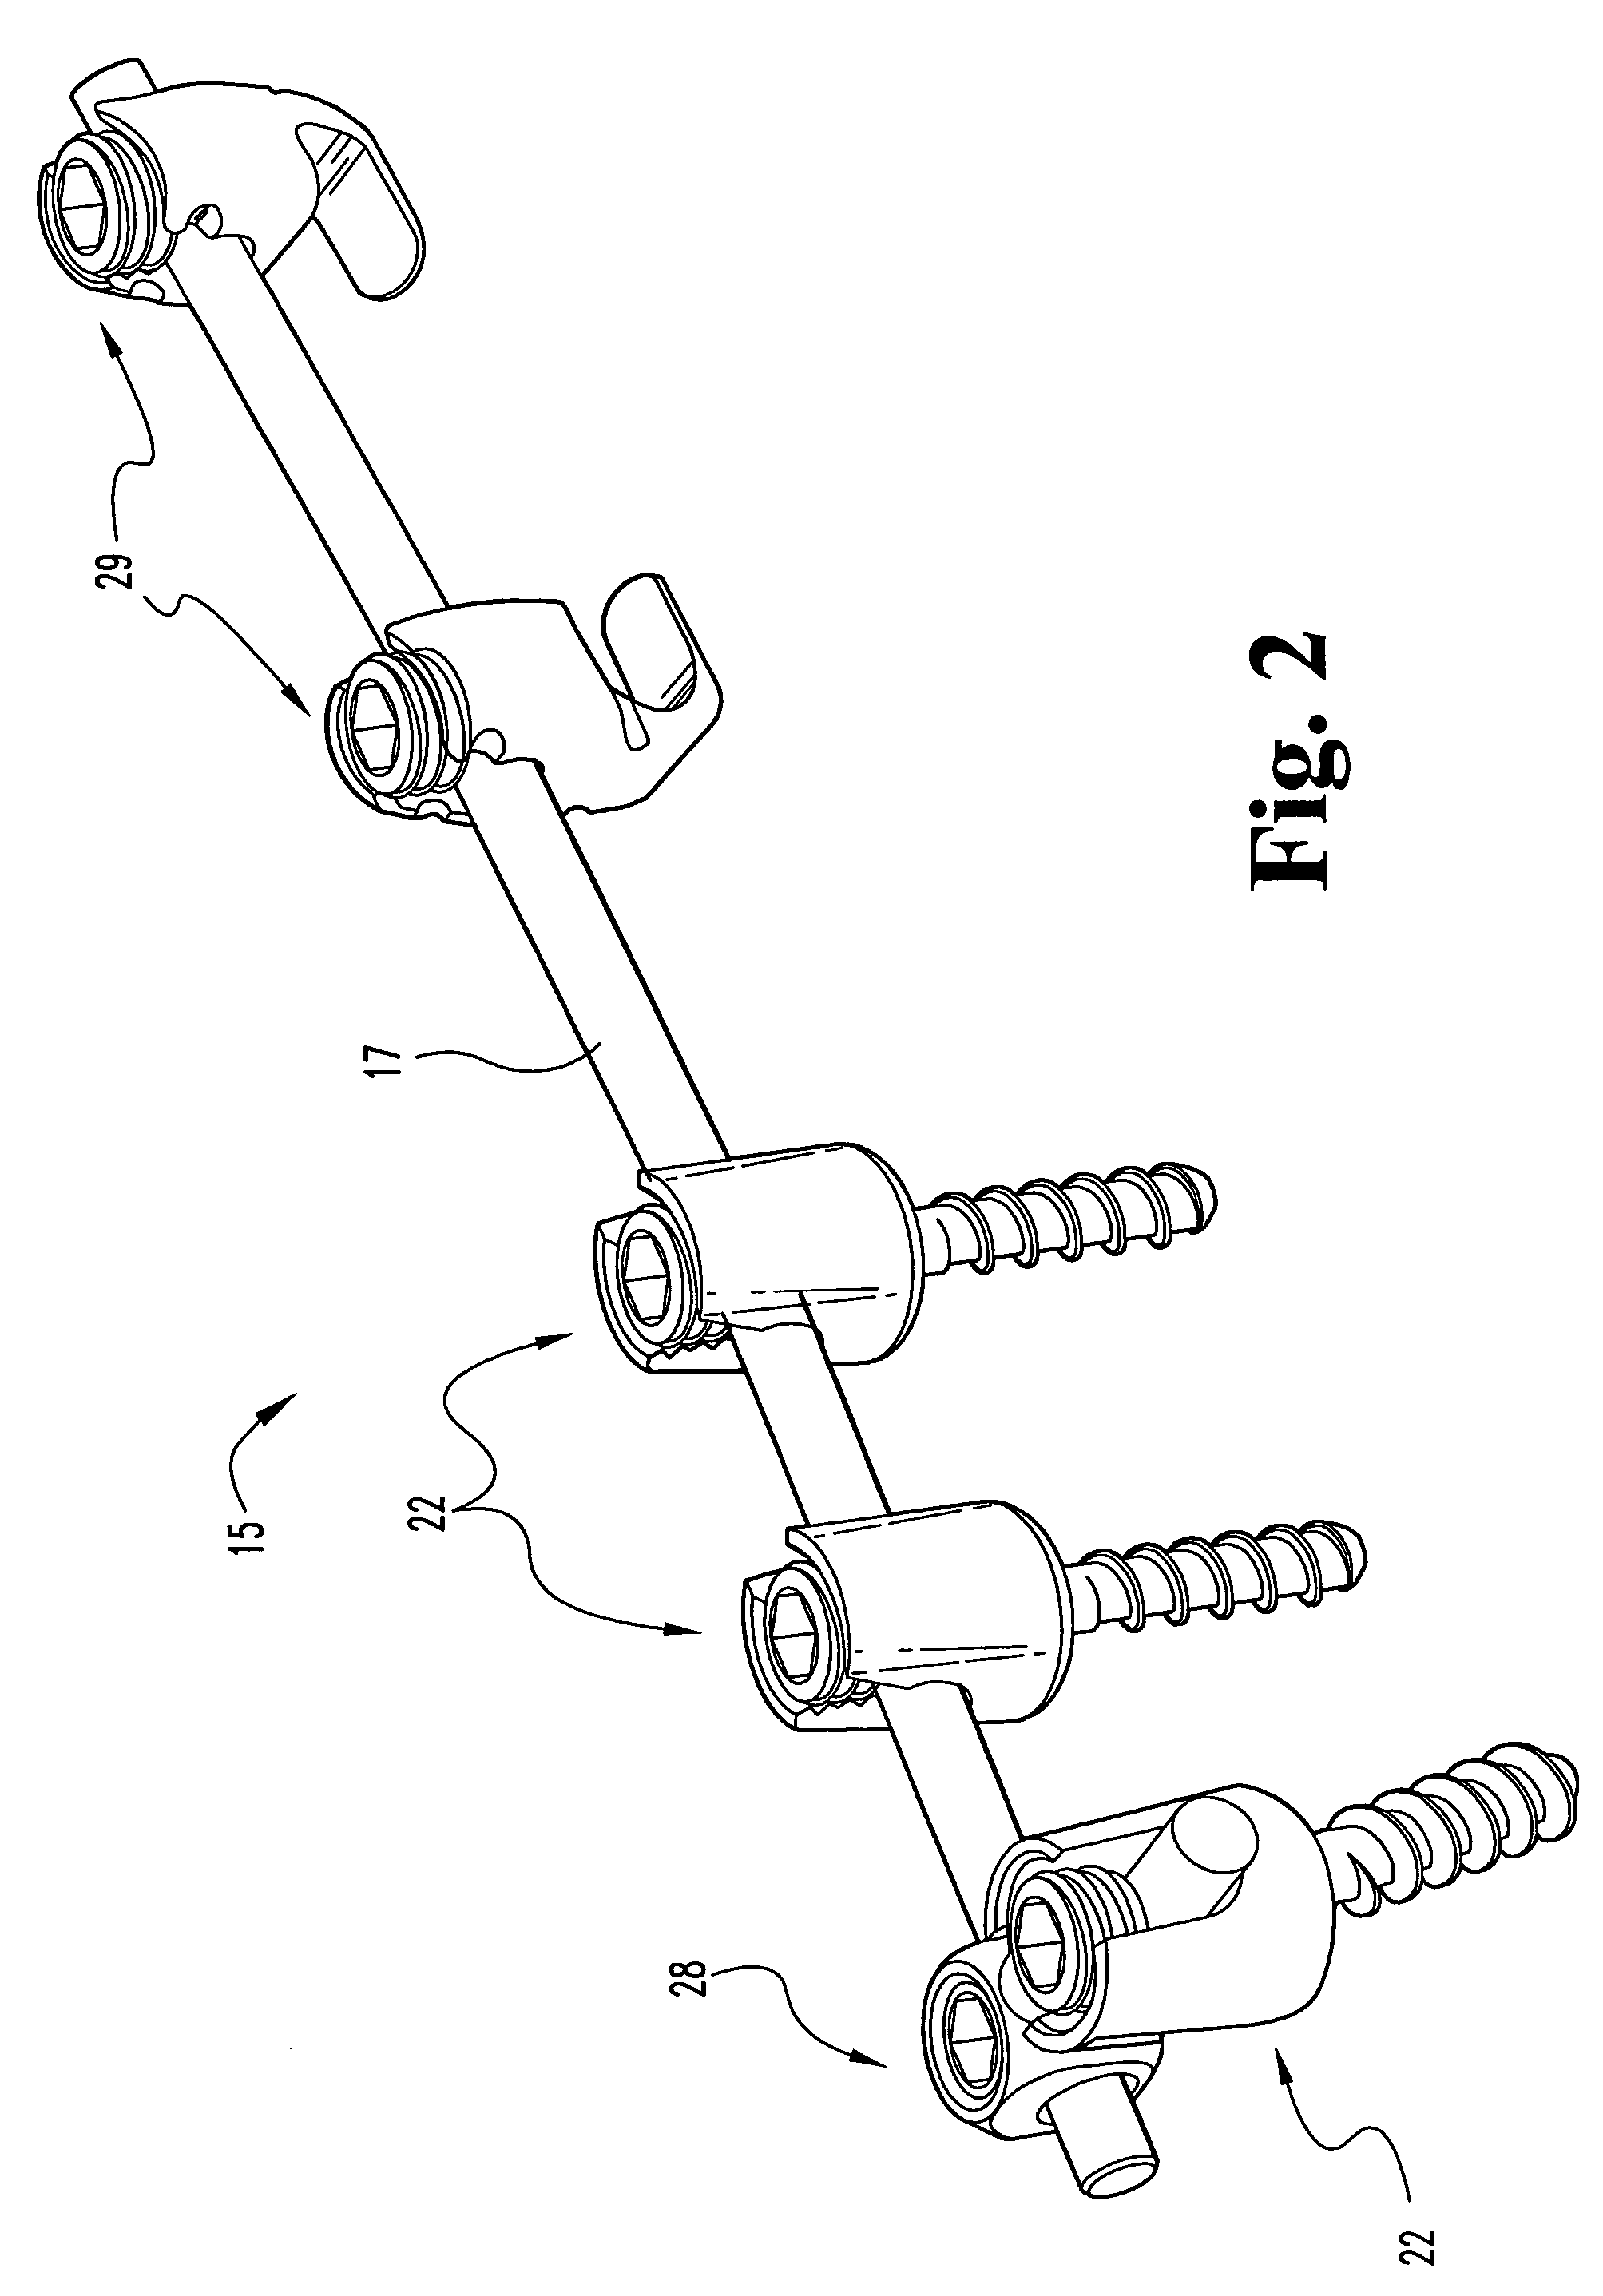 Multi-axial orthopedic device and system